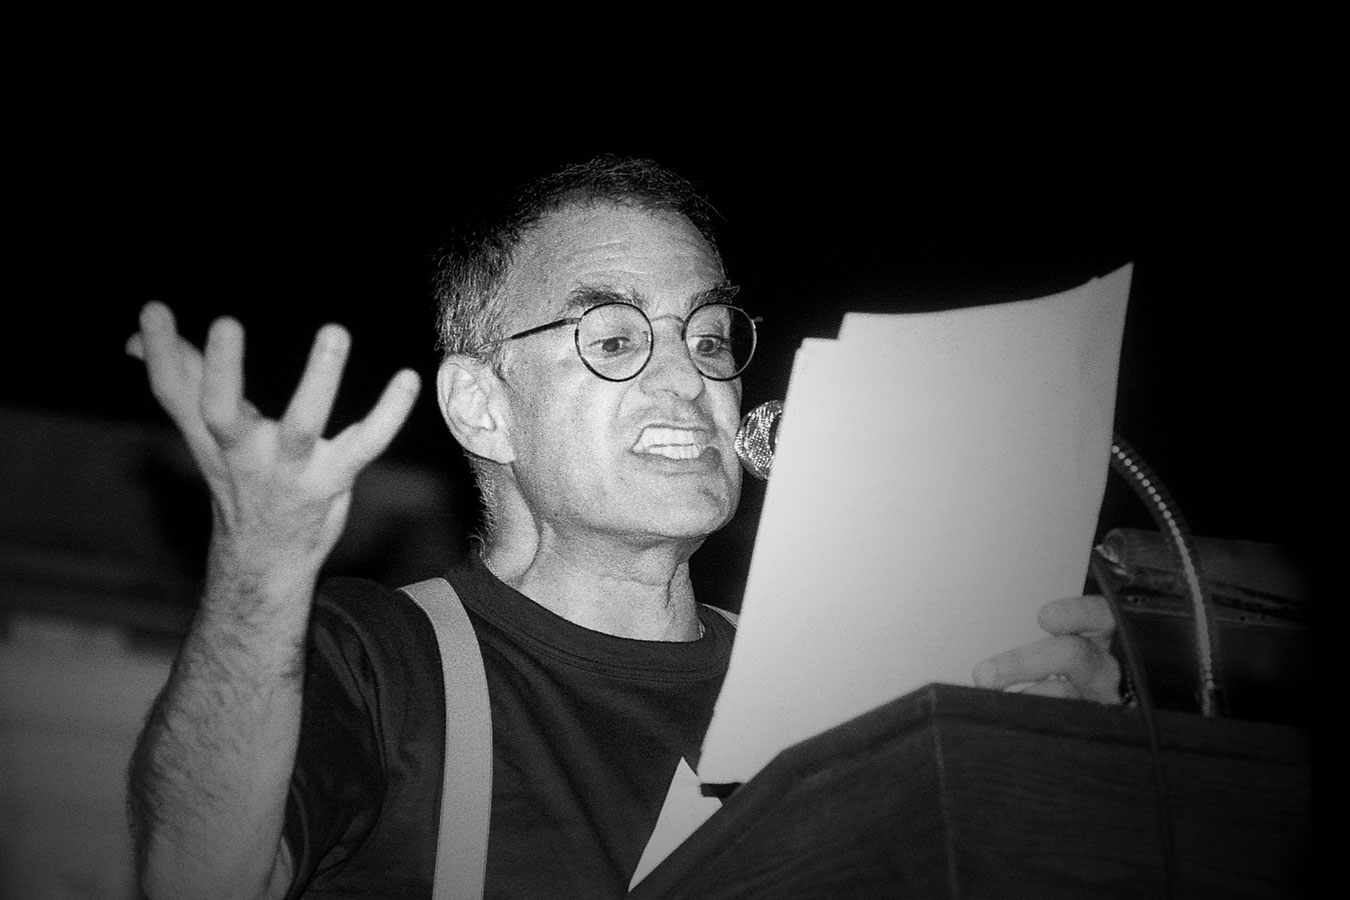 Larry Kramer reading a paper into the microphone with a very angered expression